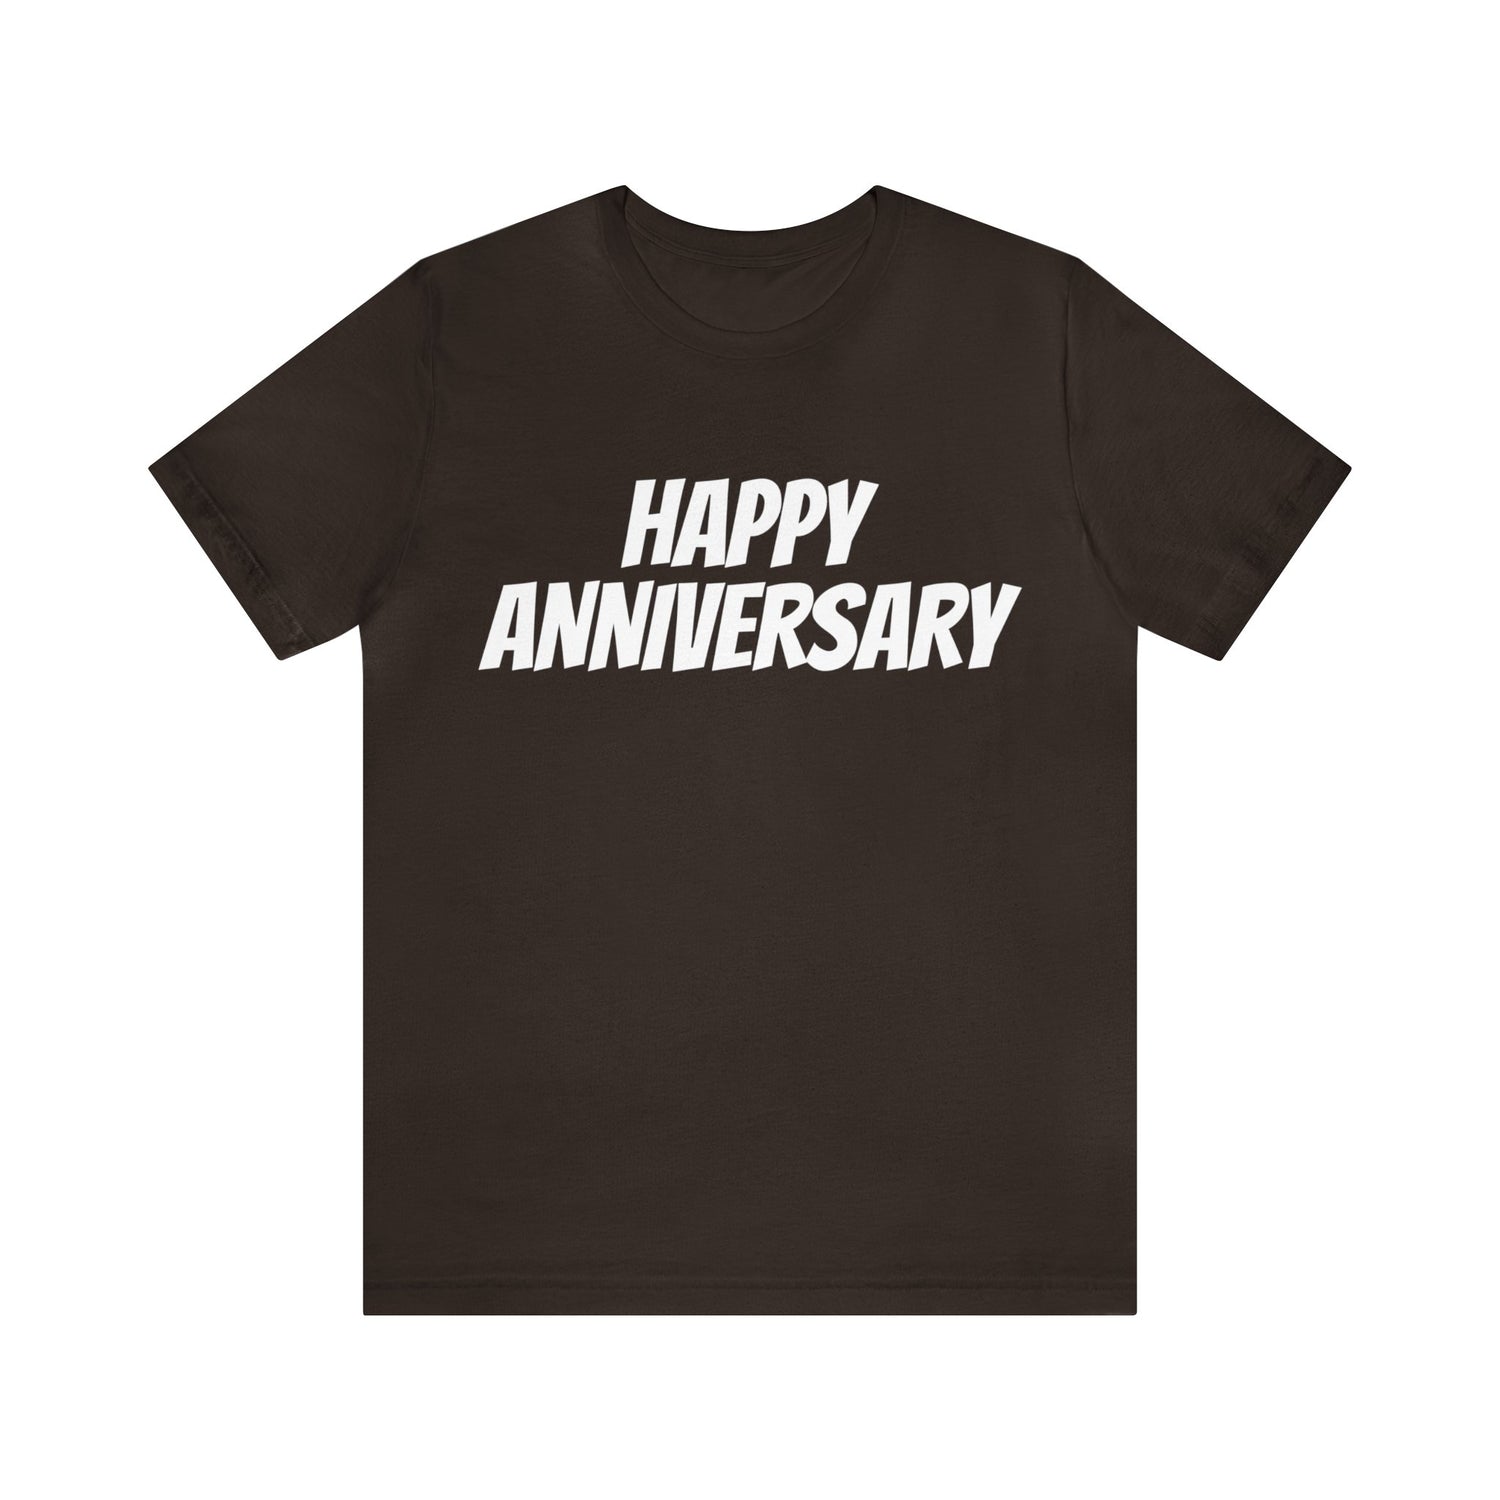 Brown T-Shirt Tshirt Gift for Friends and Family Short Sleeve T Shirt Anniversary Petrova Designs